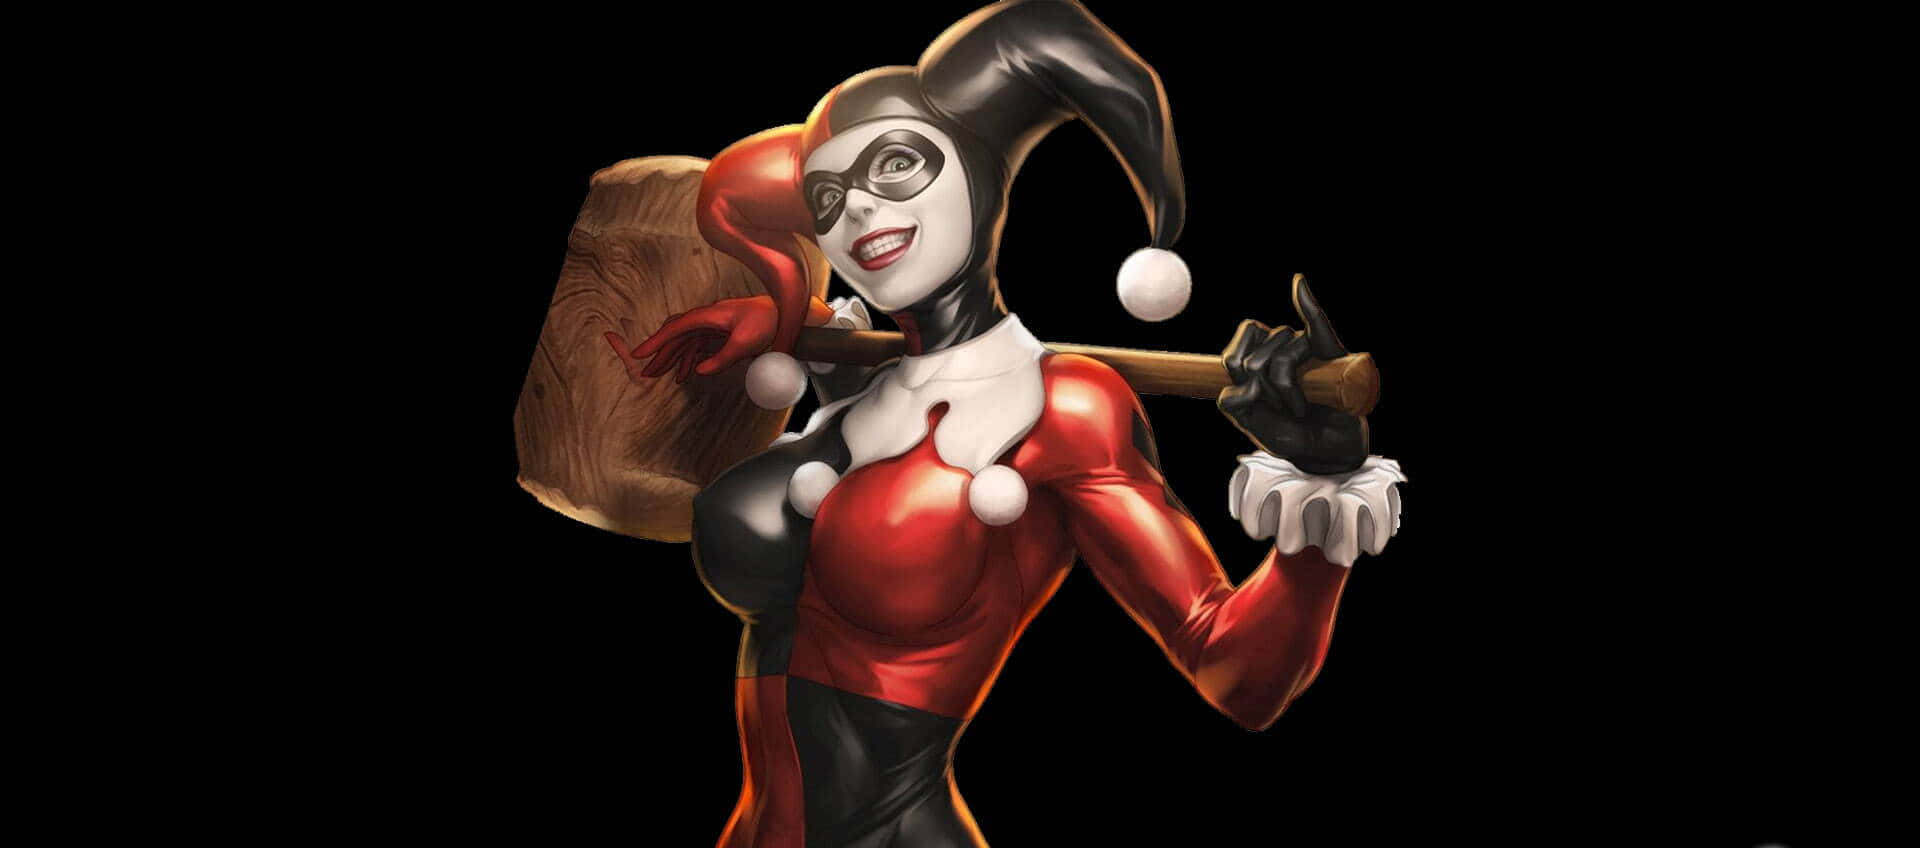 Harley Quinn swinging her iconic hammer in action Wallpaper